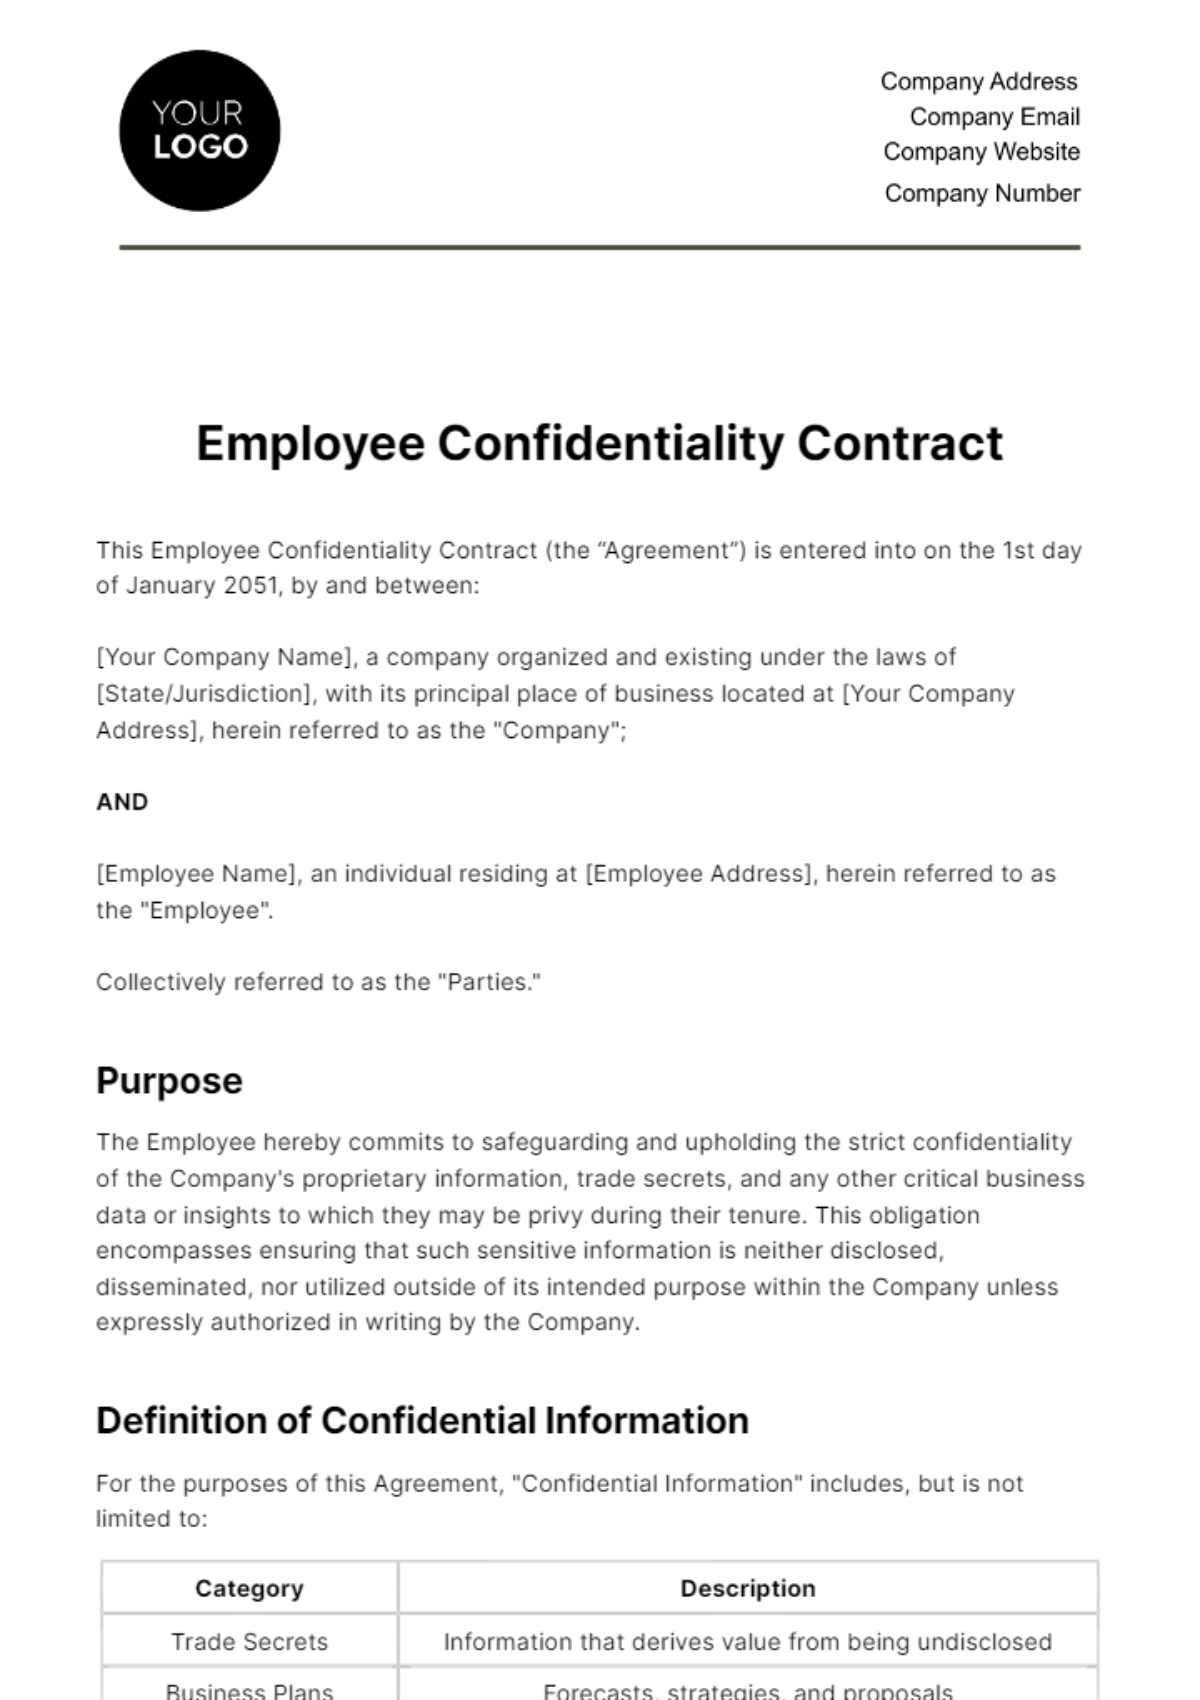 Employee Confidentiality Contract HR Template